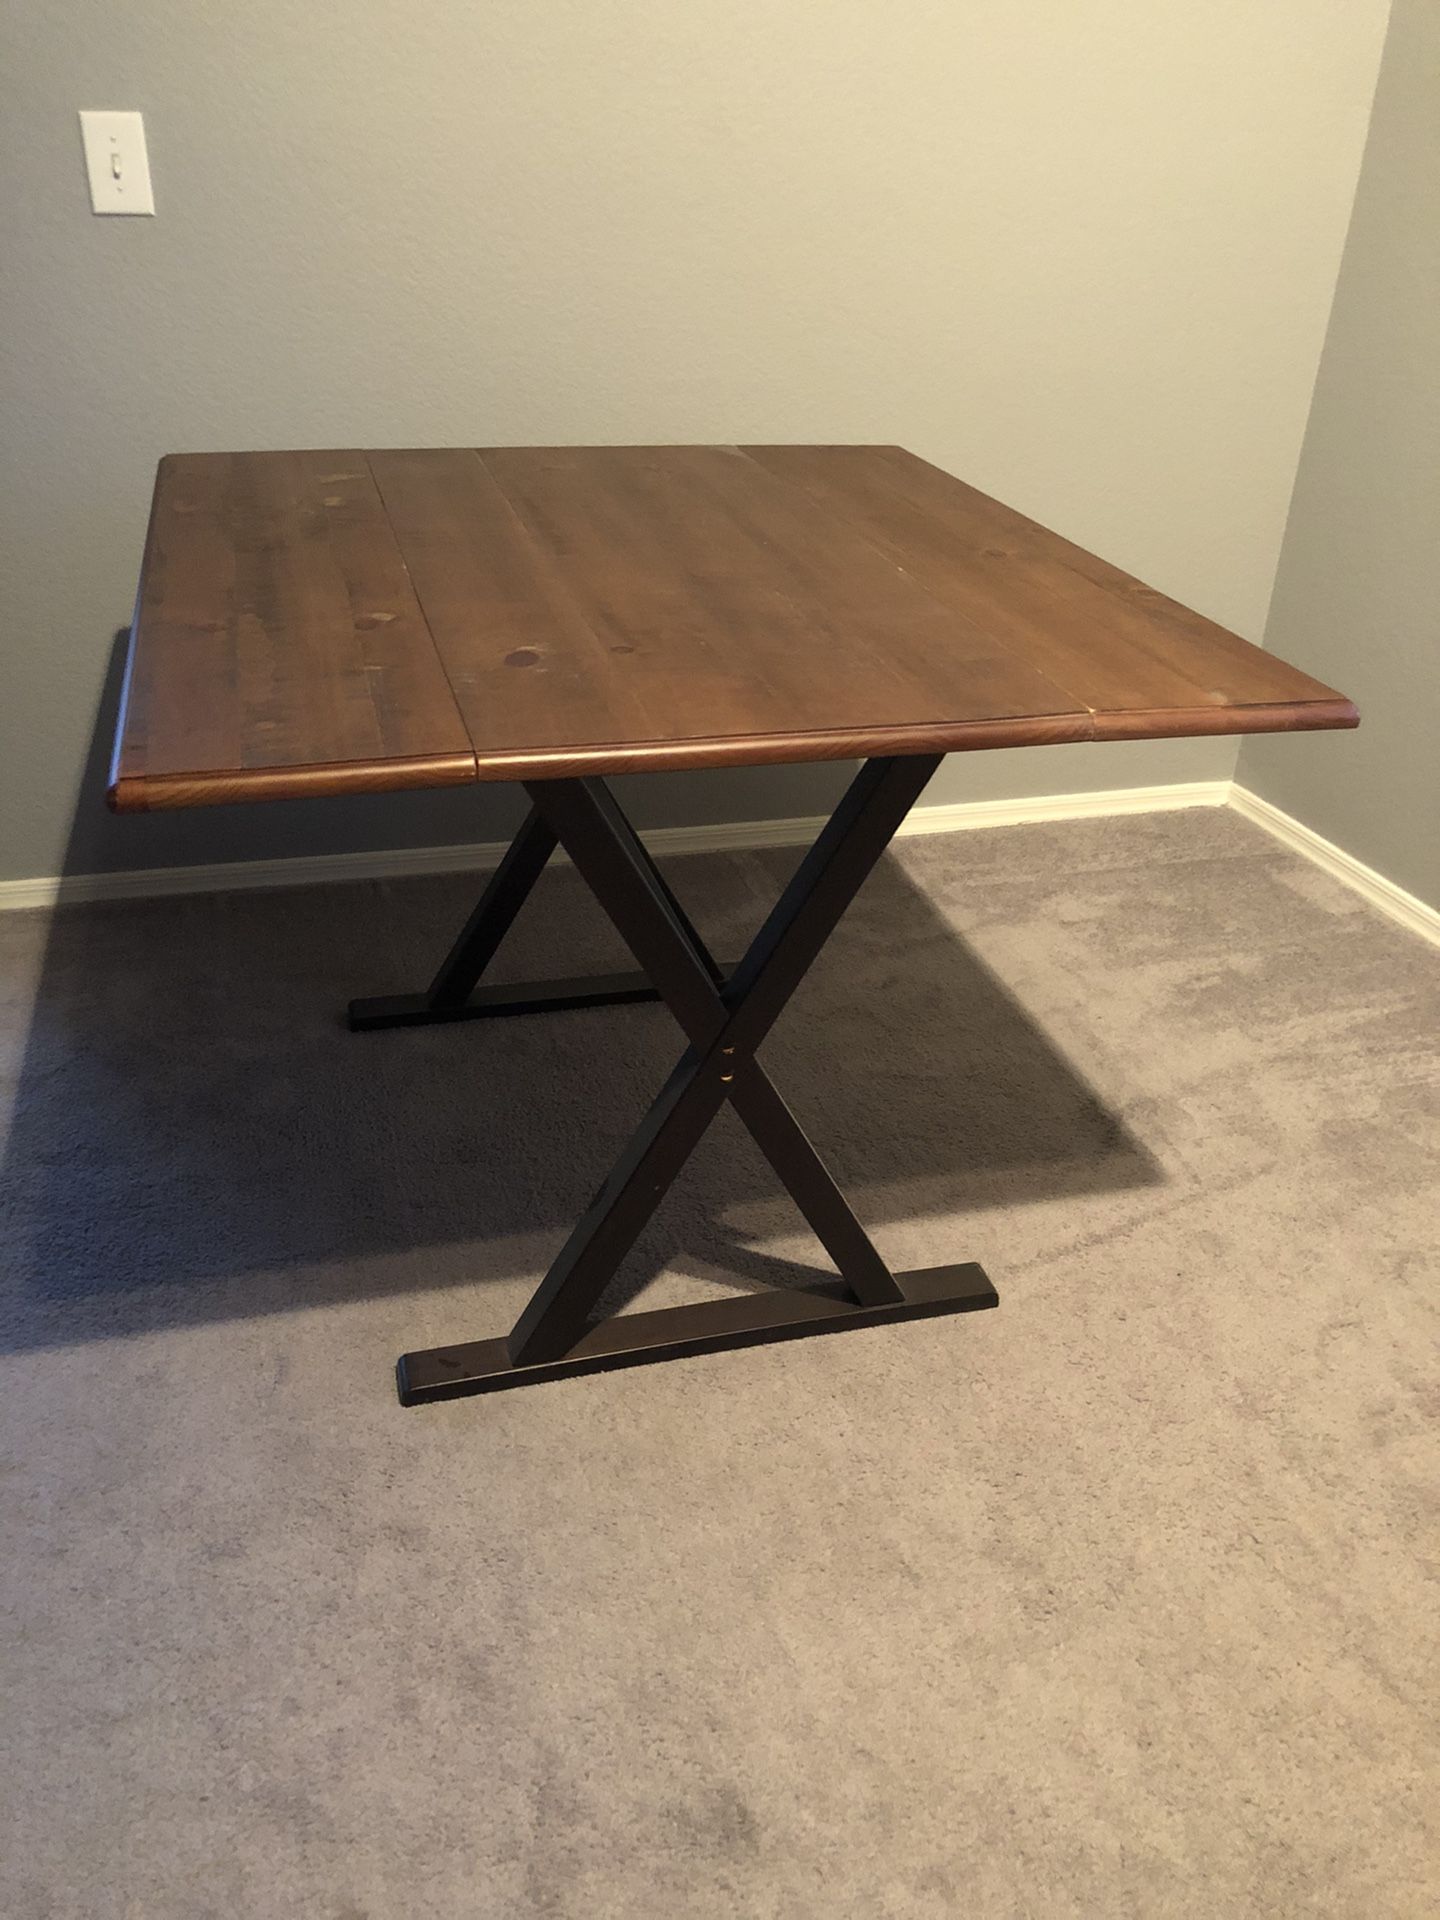 Kitchen table from Target